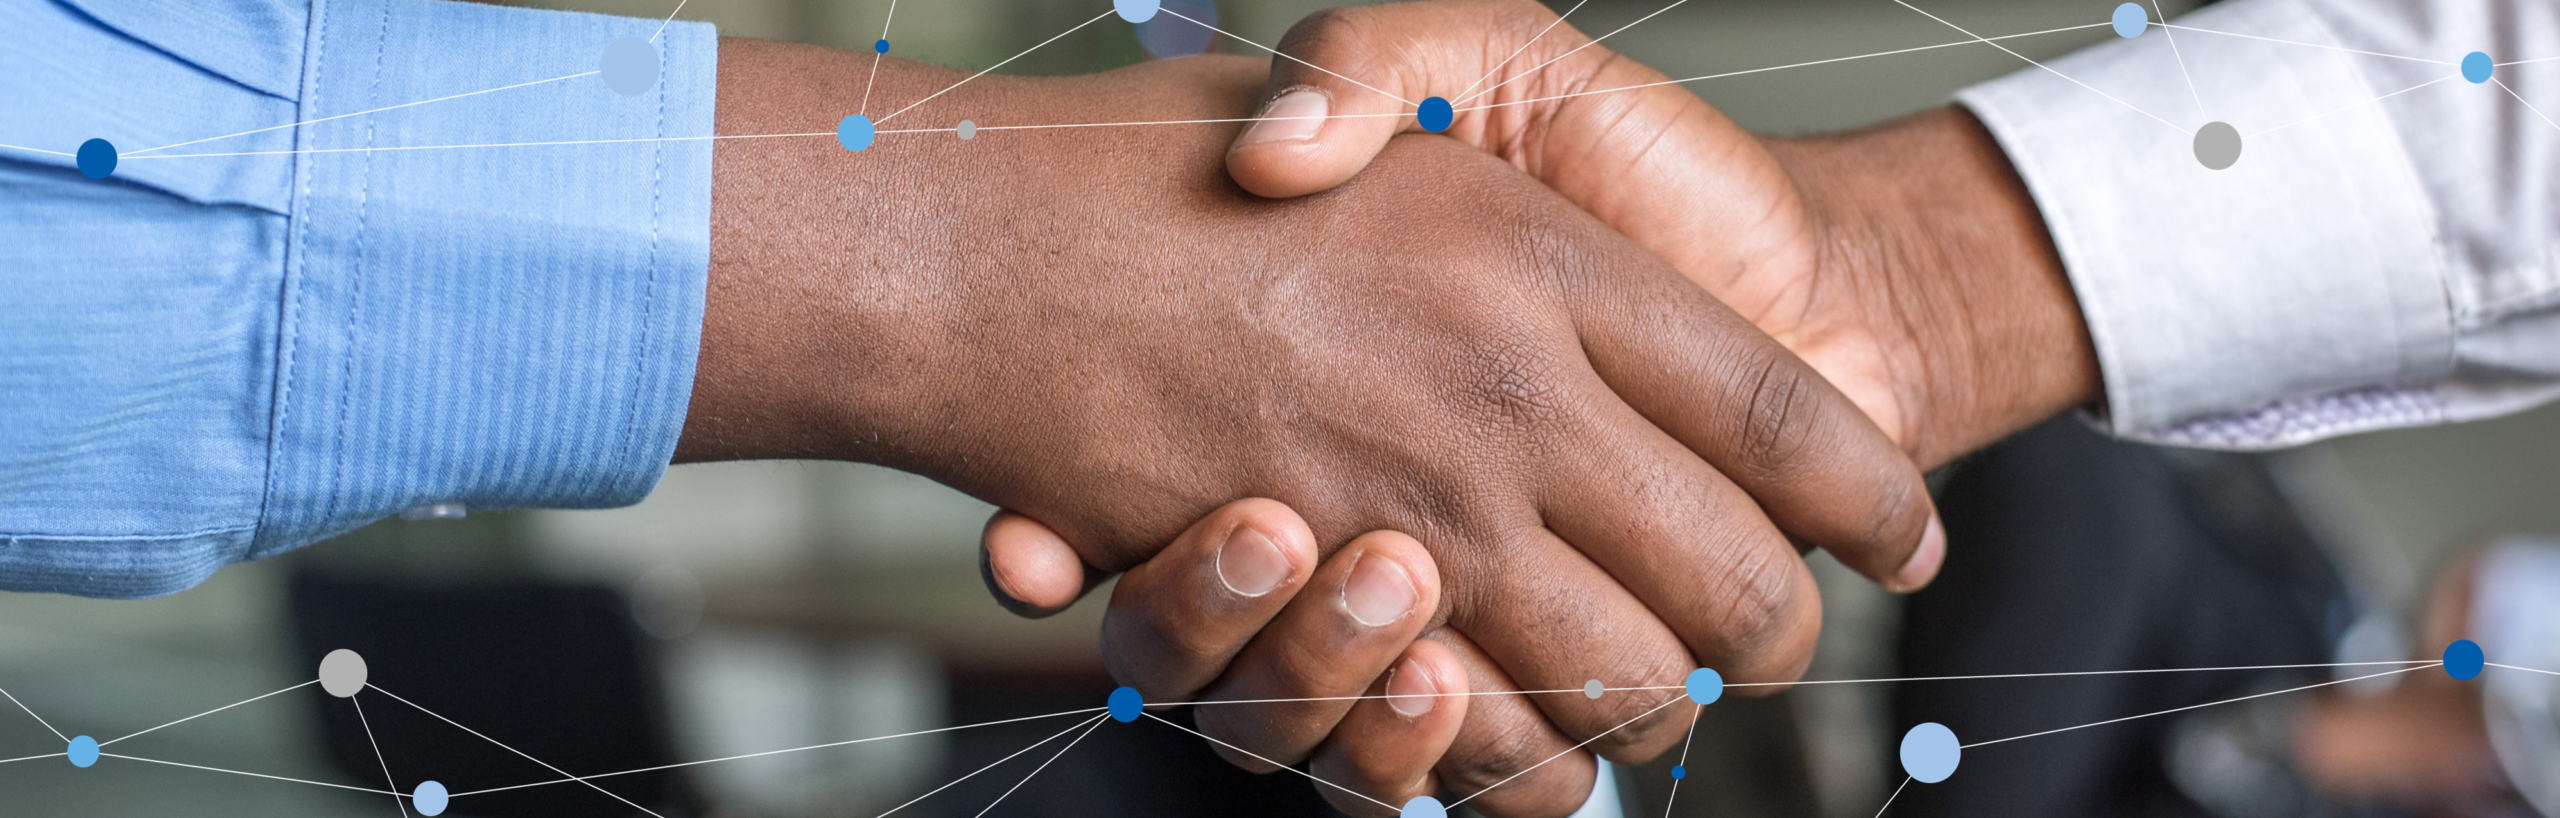 A photograph of two hands shaking. The hands have dark skins, and they are wearing long sleeves shirts. The background is blurred. ovr the top, top and bottom of the photo are graphical lines connected by blue dots.